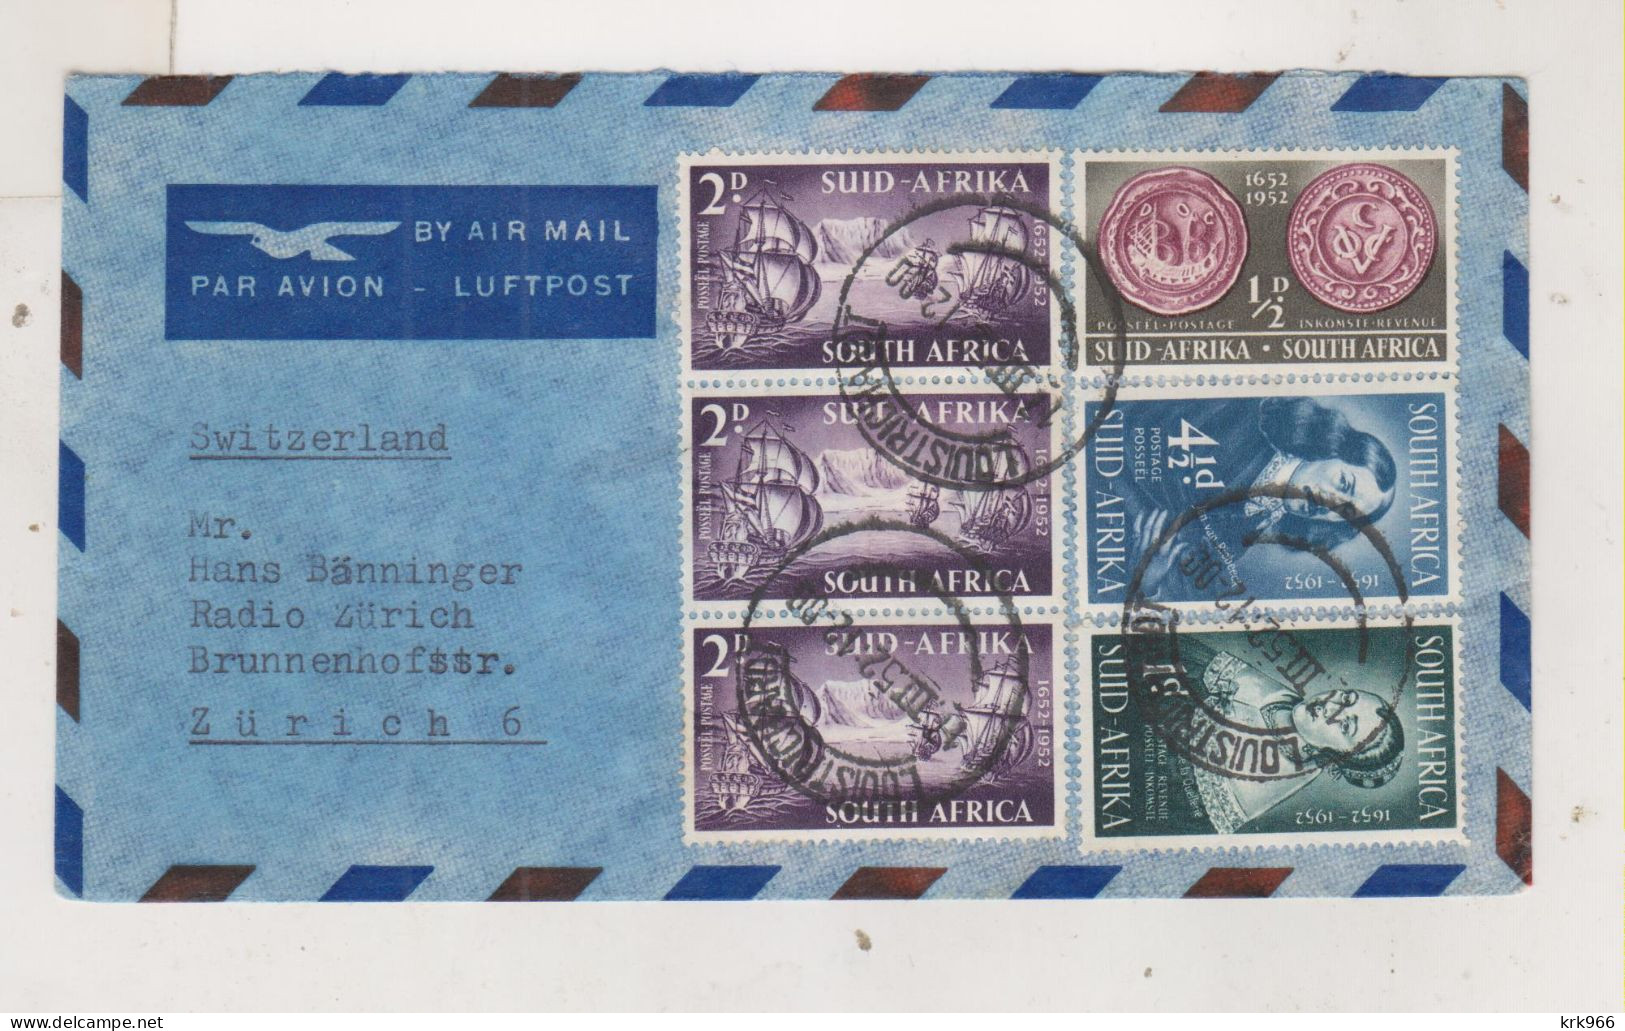 SOUTH AFRICA 1952 LOUIS TRIHARDT Nice Airmail Cover To Switzerland - Luftpost